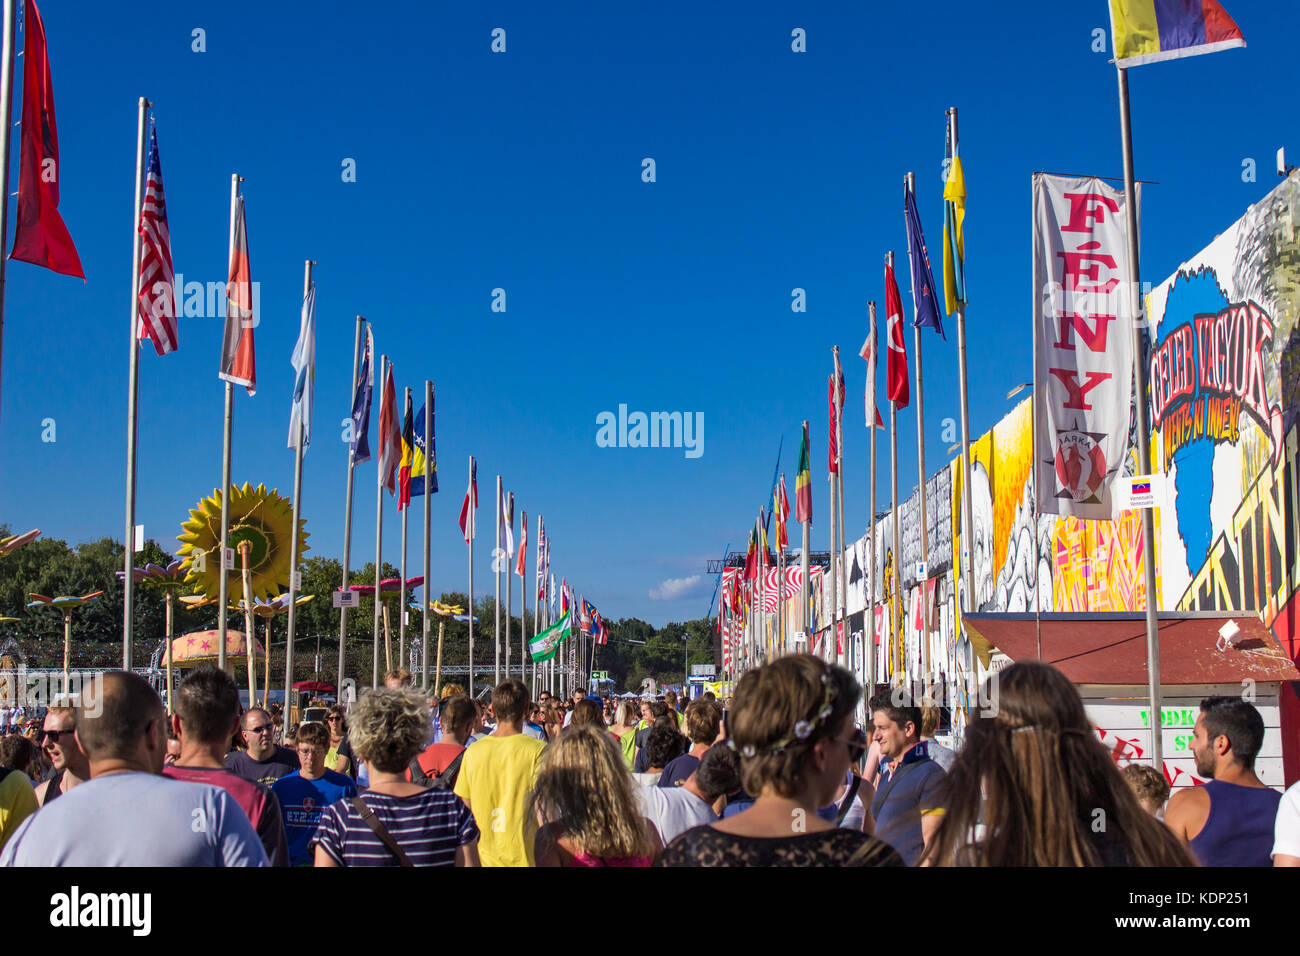 BUDAPEST, HUNGARY - AUGUST 17, 2014: Unidentified people on the Sziget Festival in Budapest.  Sziget Festival is one of the largest music and cultural Stock Photo